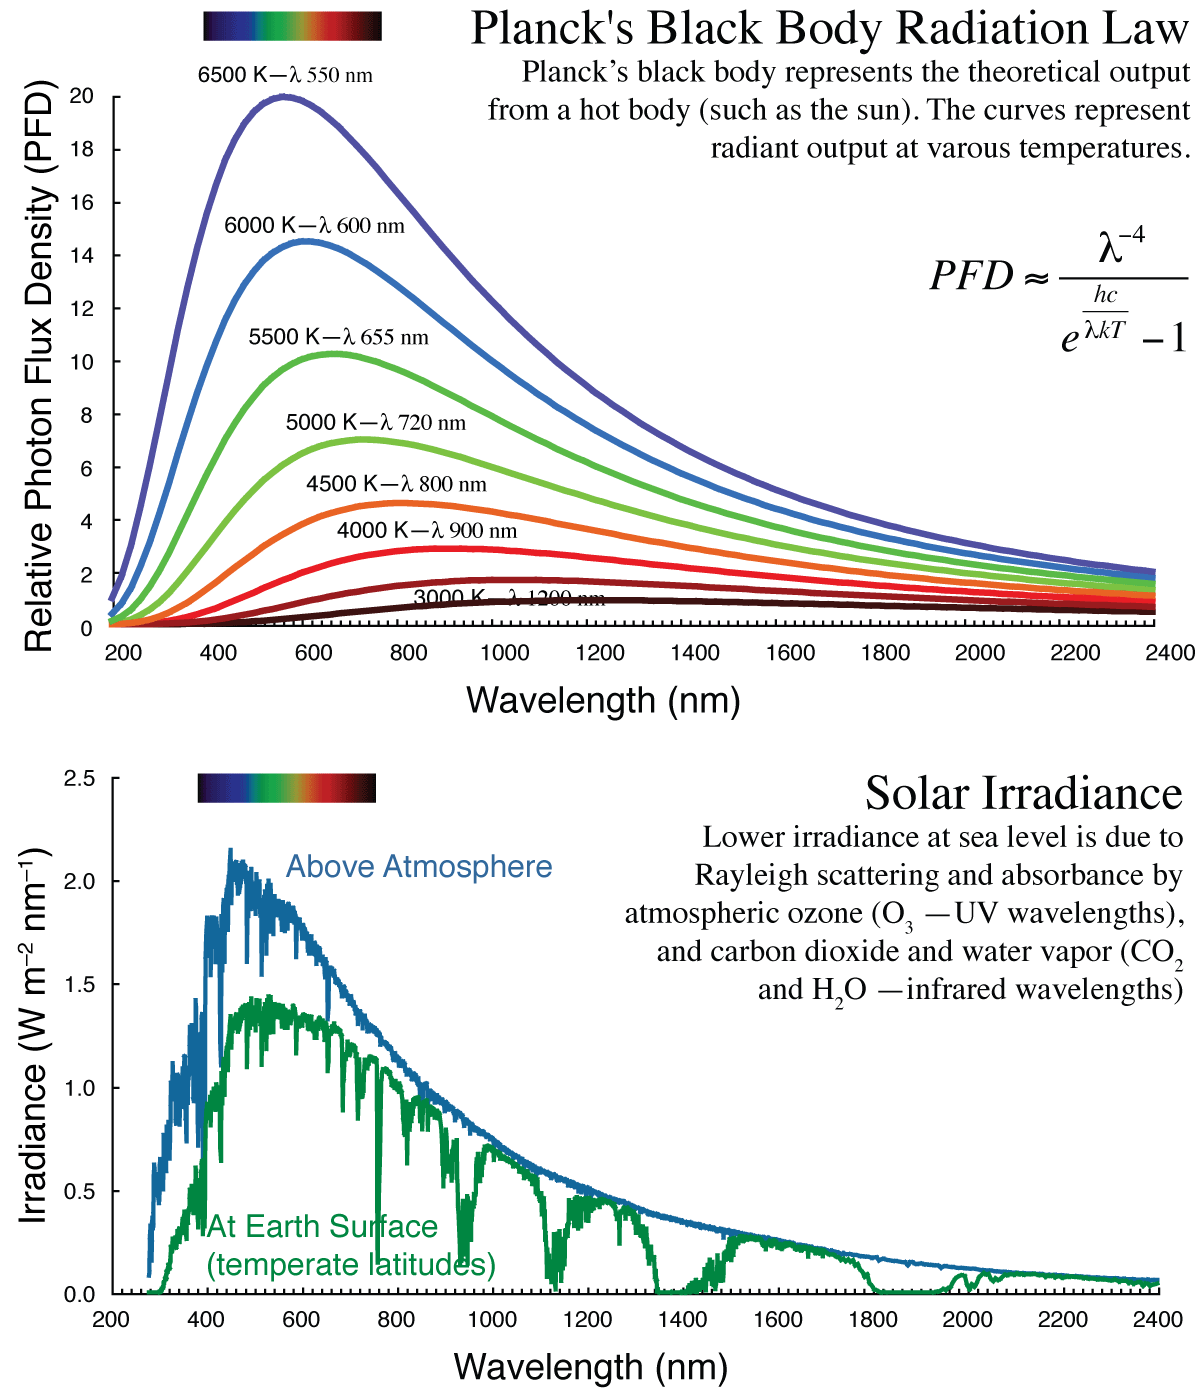 theoretical black body spectra at various temperatures and solar spectra